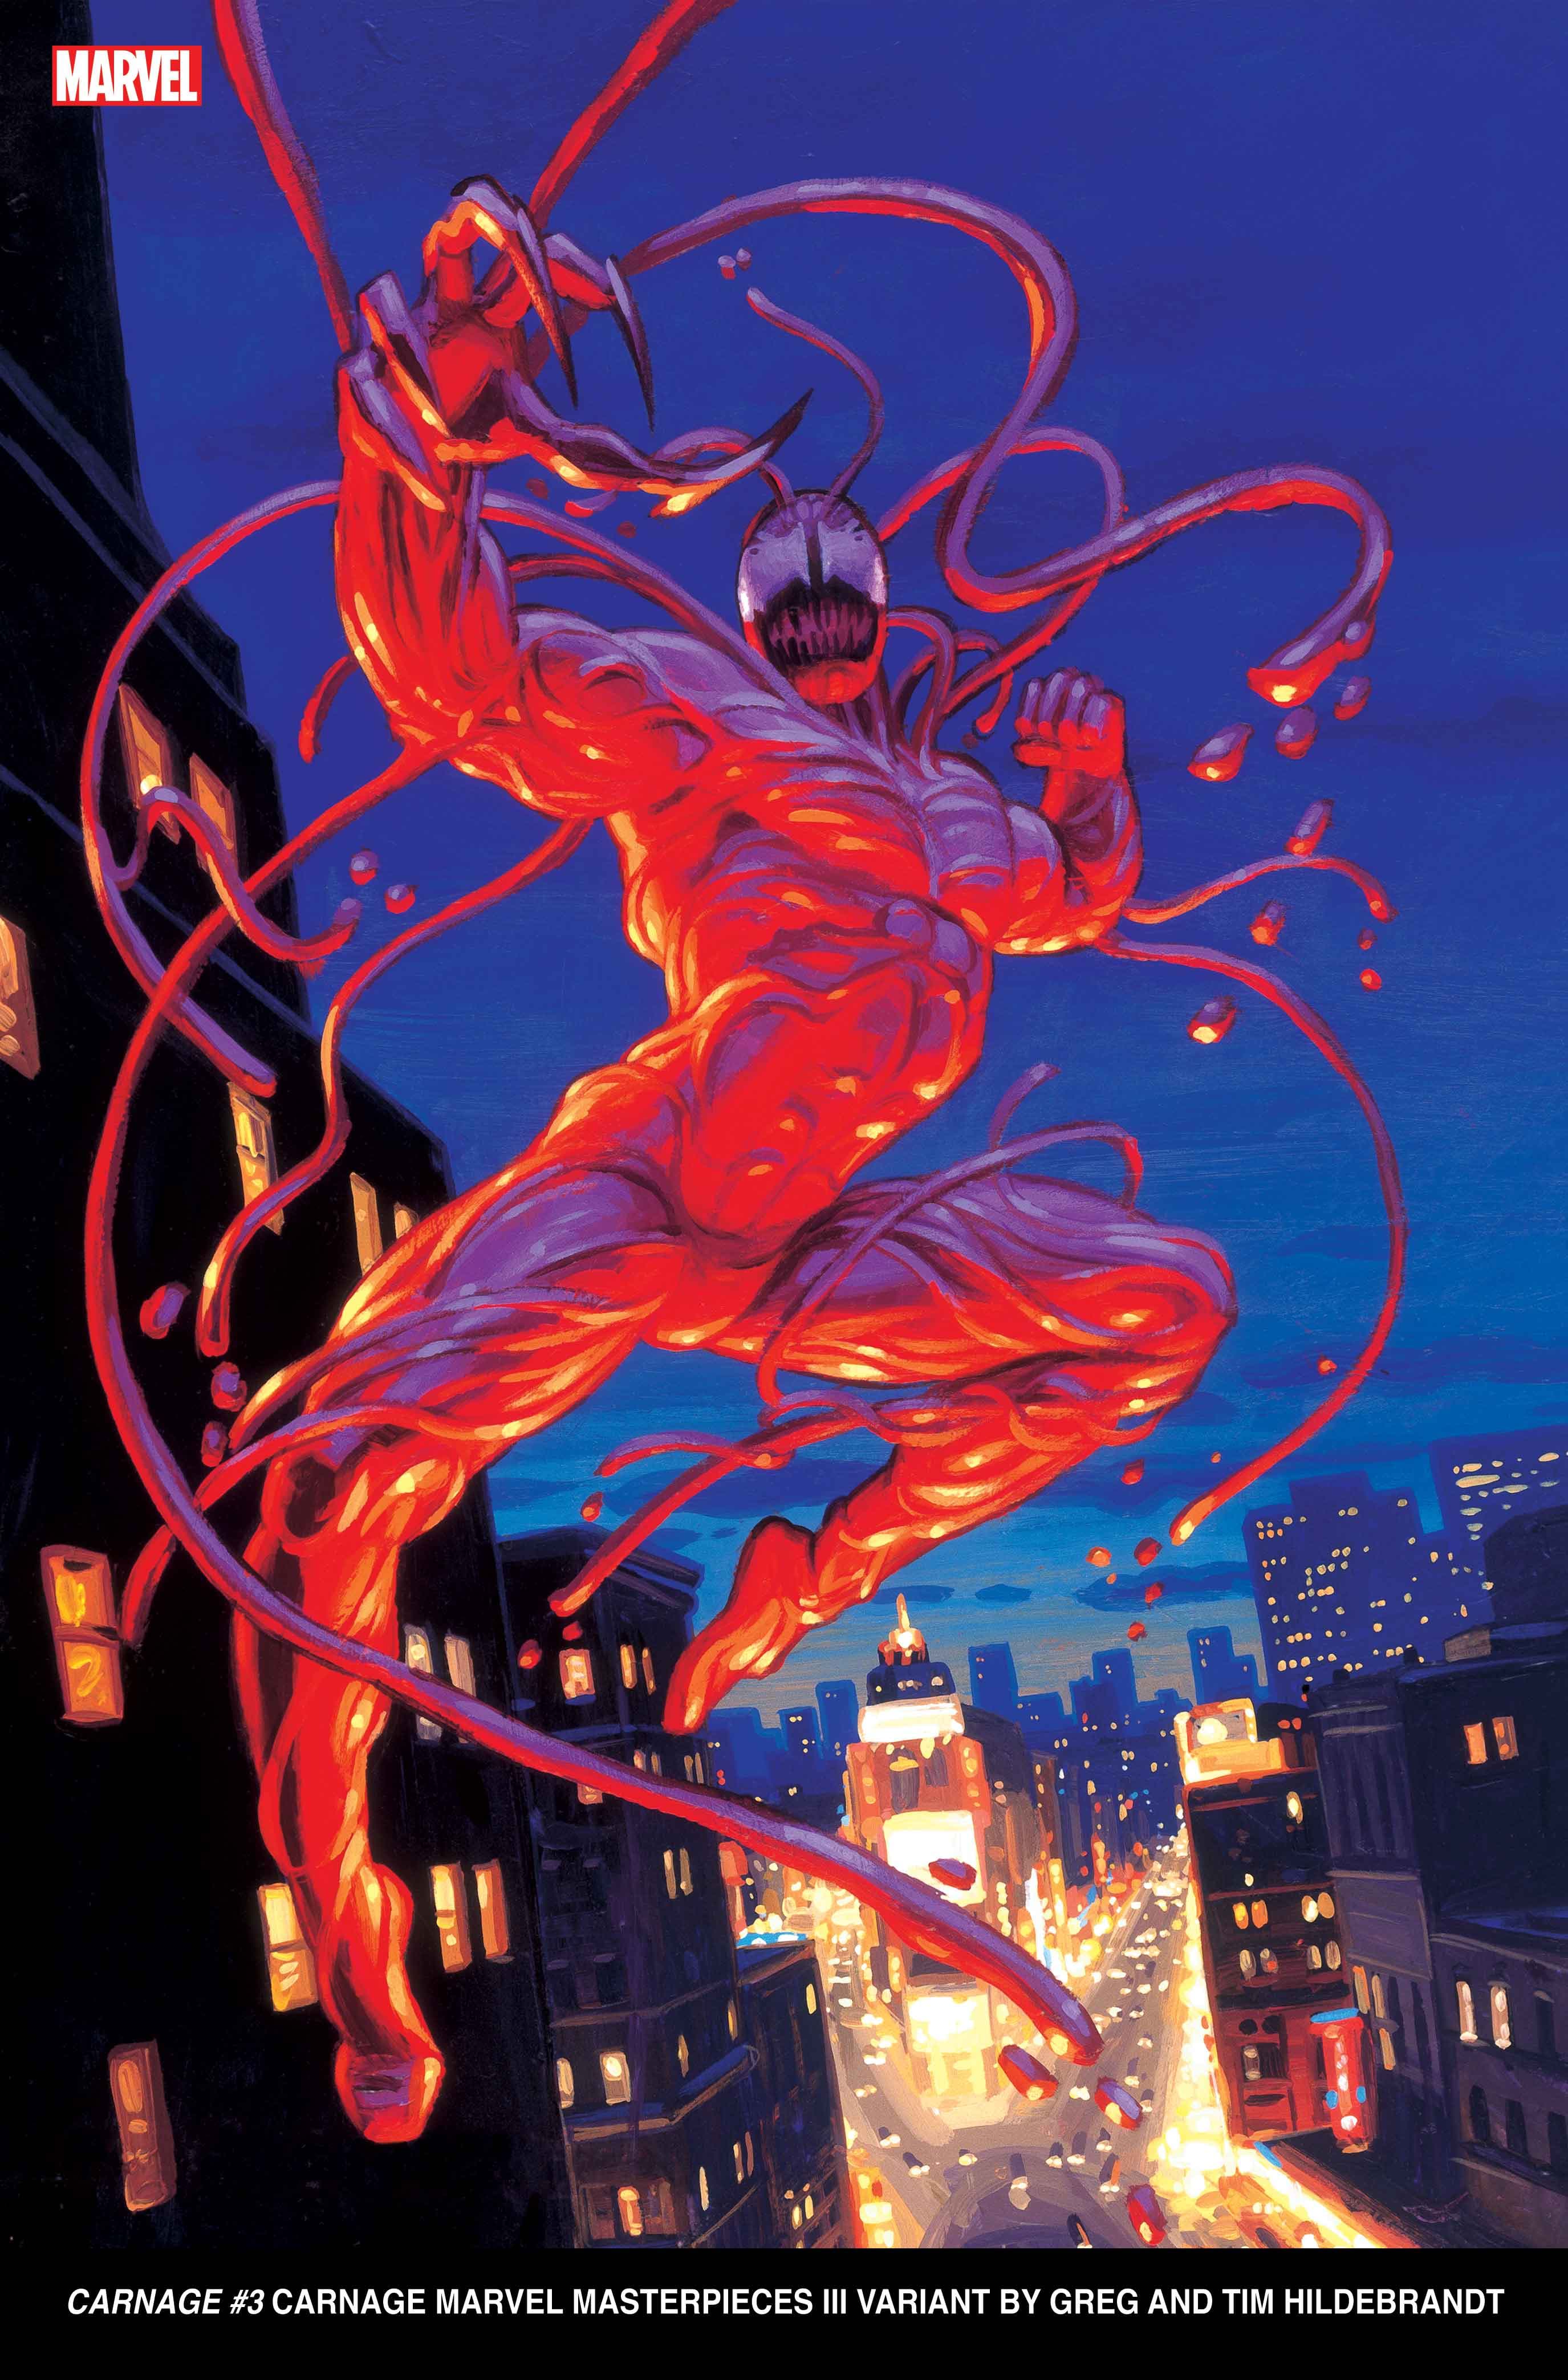 Celebrate the 30th Anniversary of Greg and Tim Hildebrandt's 